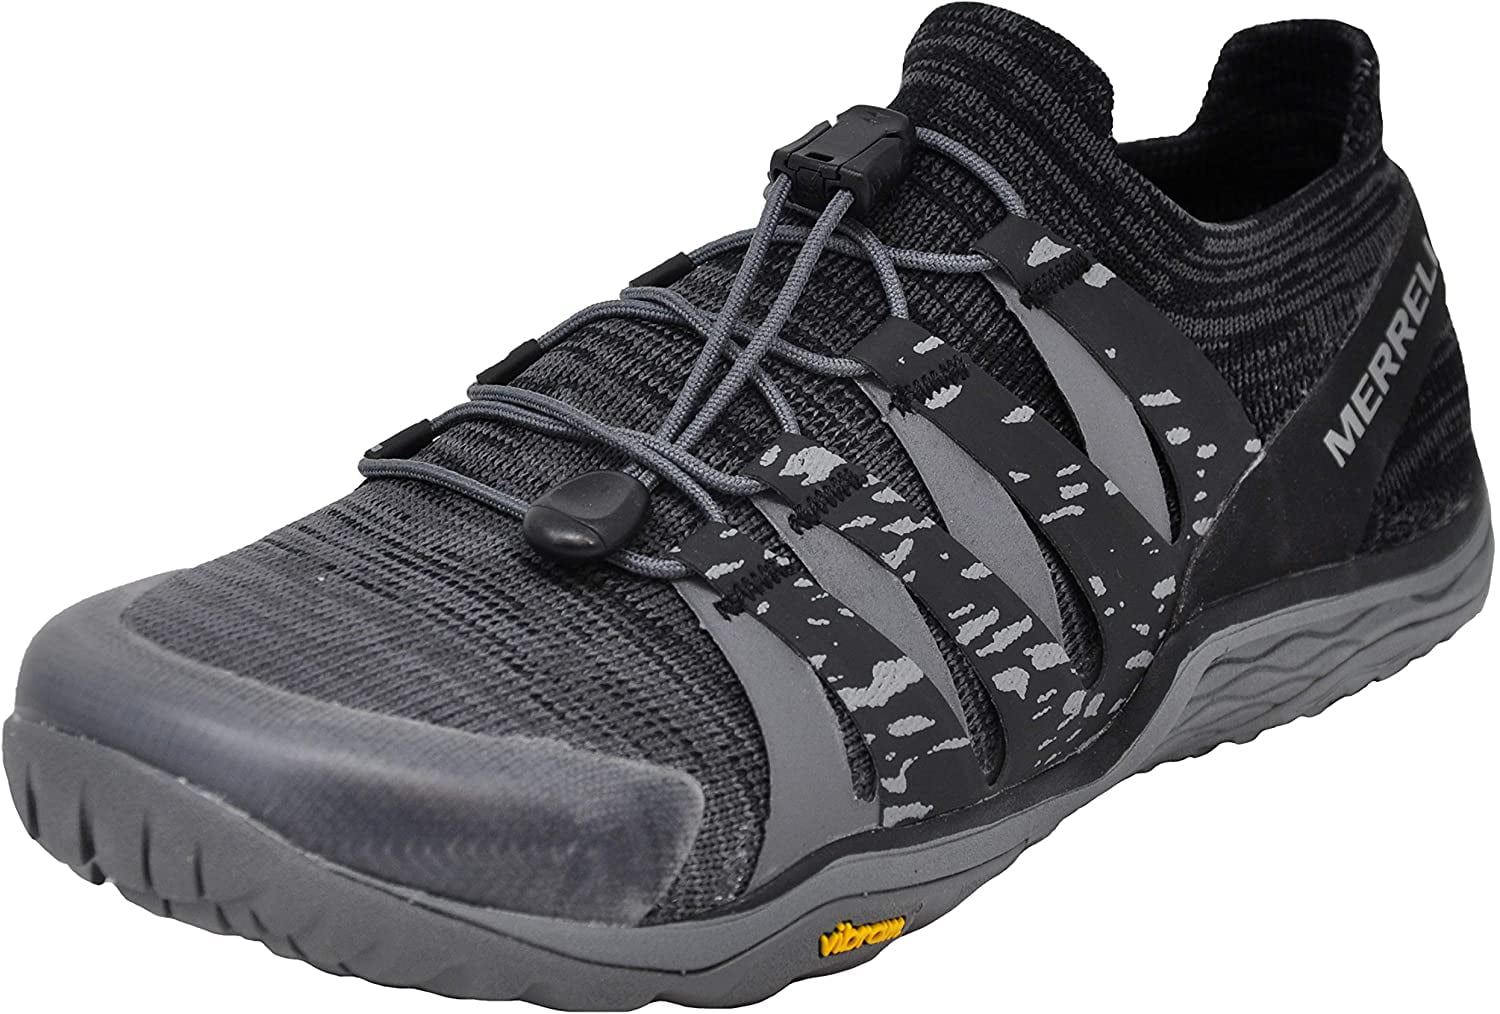 Merrell Womens Trail Glove 5 3d Fitness Shoes